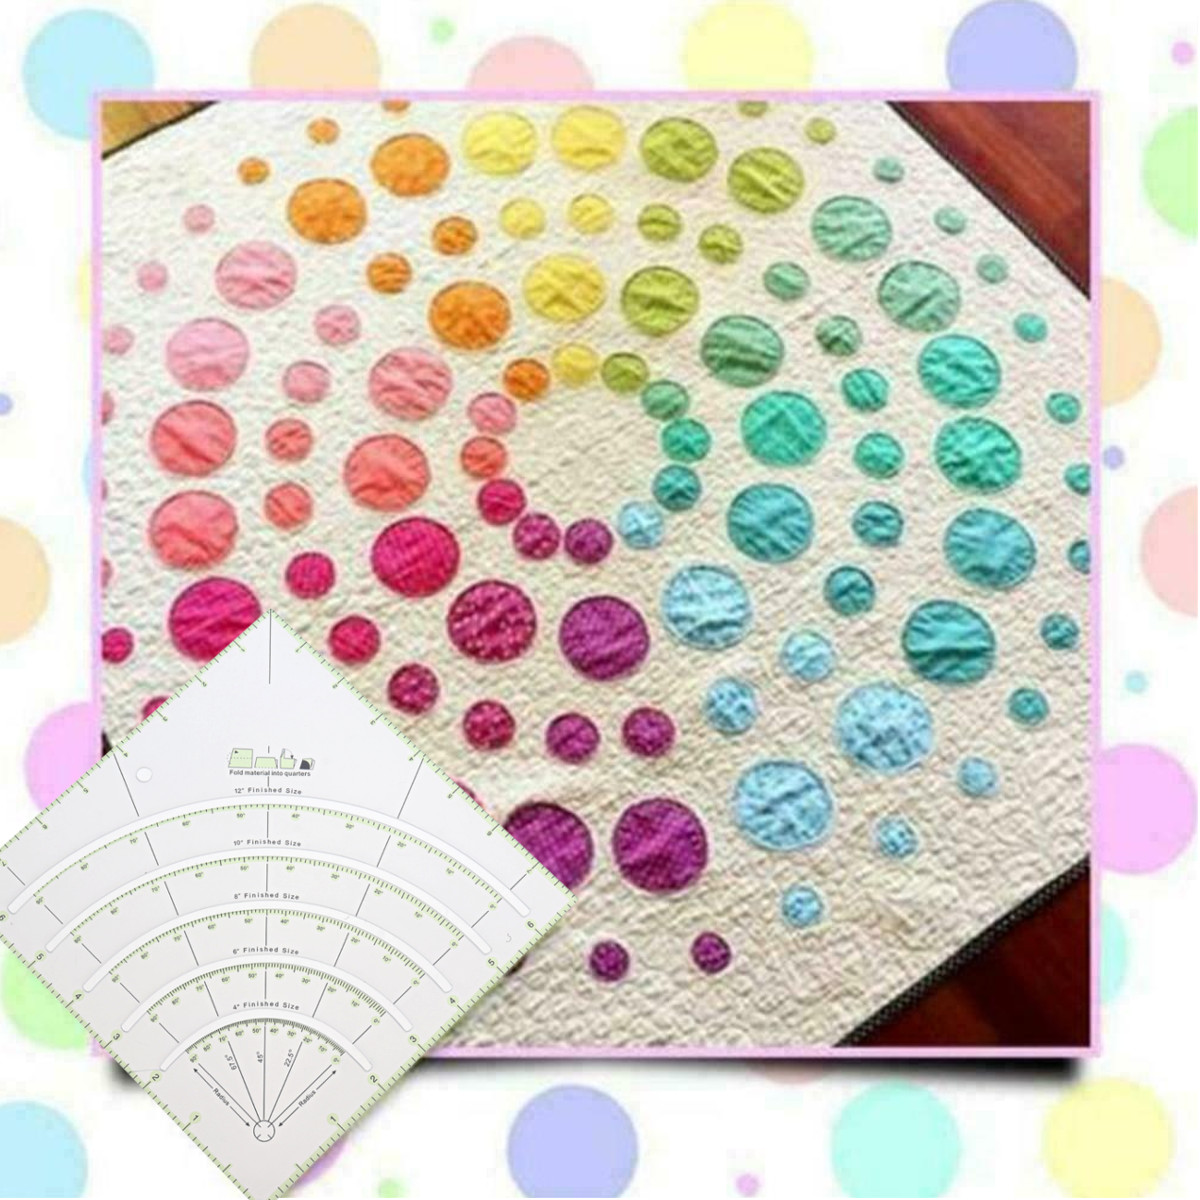 Multifunctional-Acrylic-Arcs--Fans-Quilt-Paper-Fabric-Circle-Cutter-Ruler-1818365-1